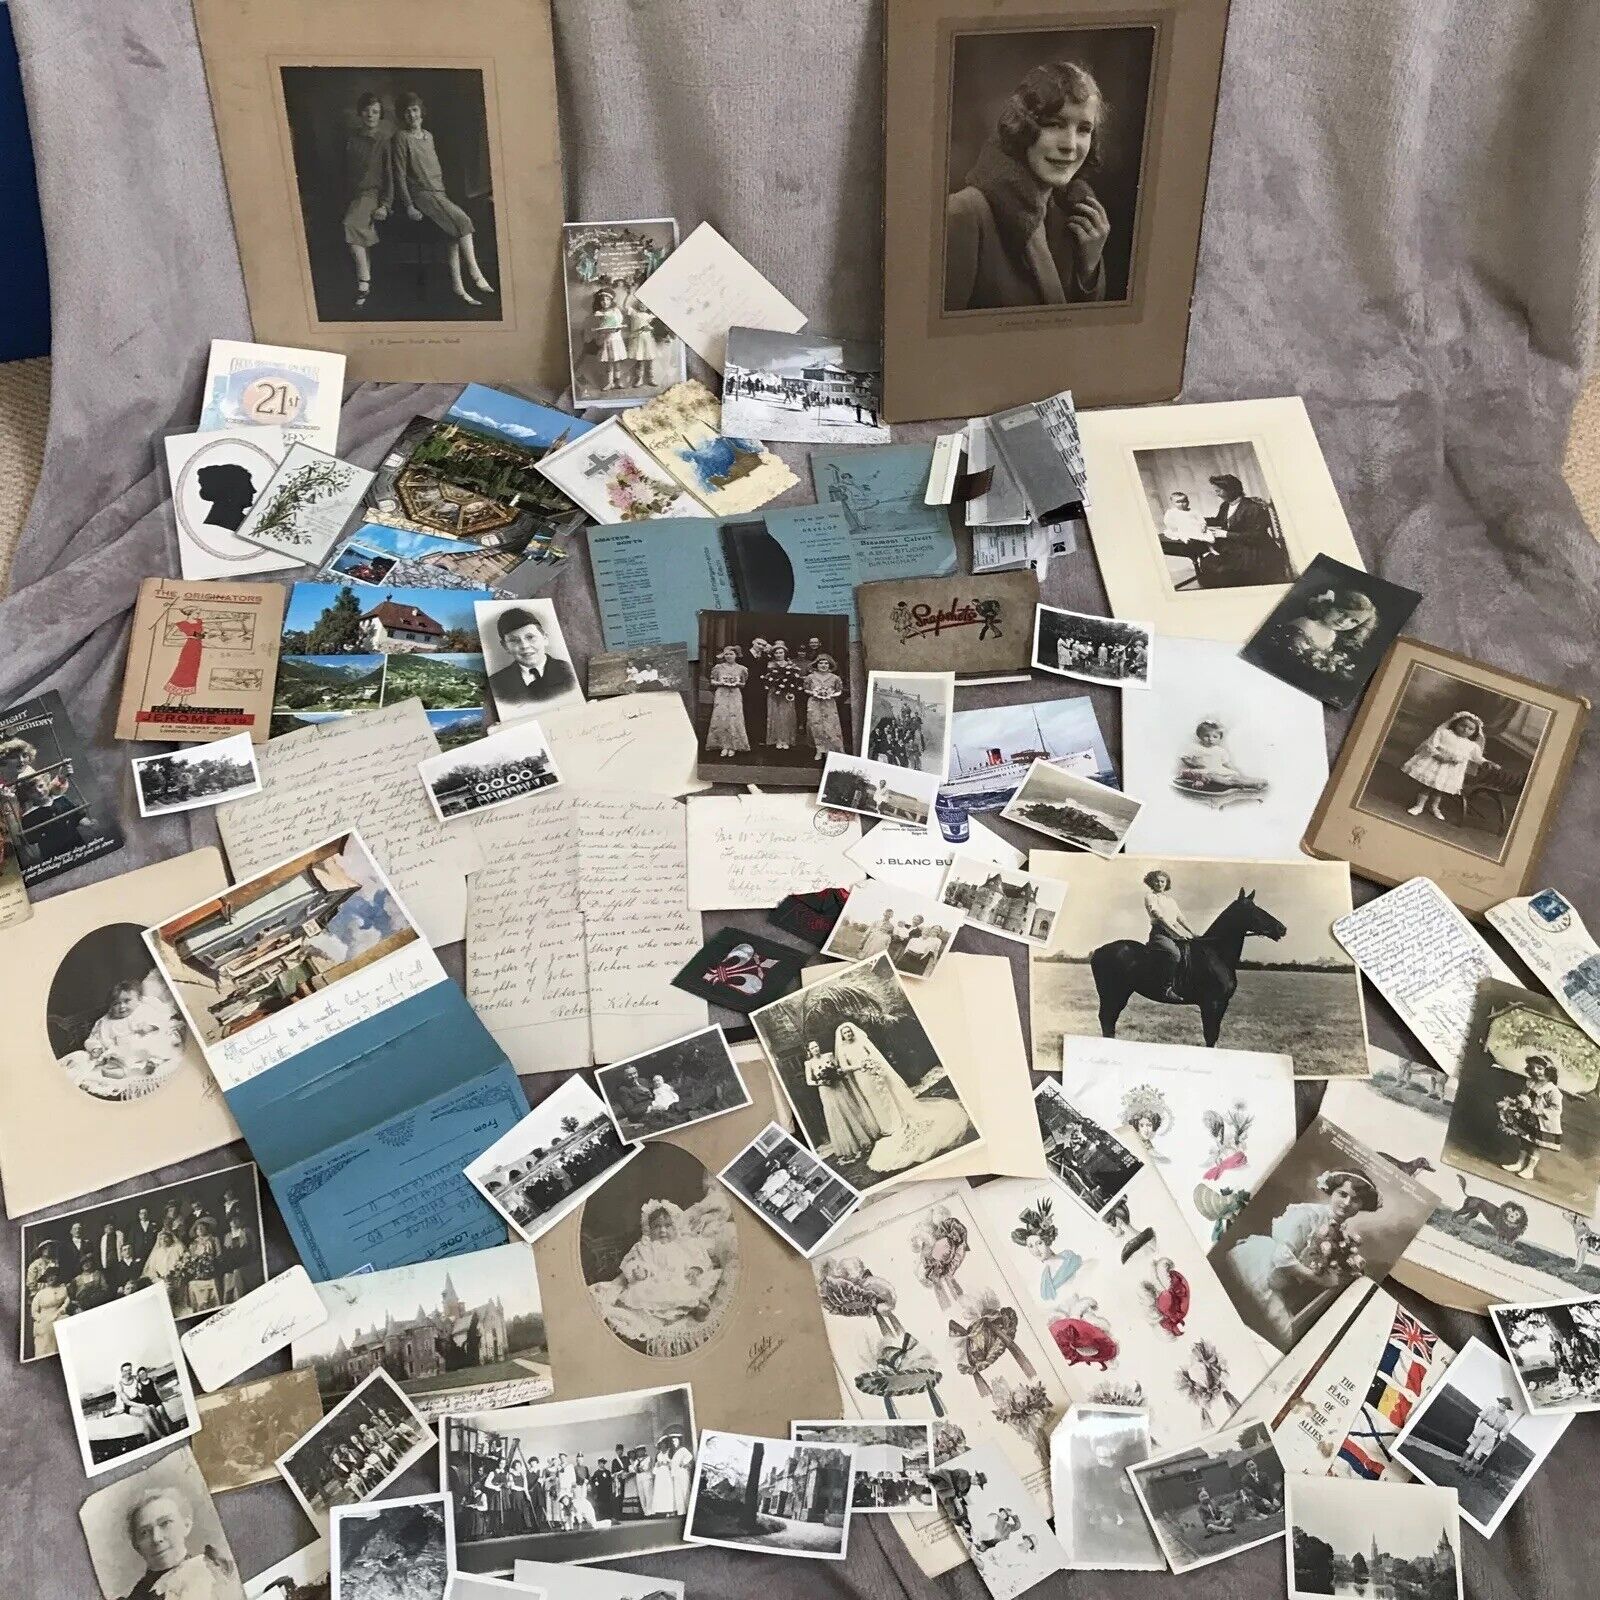 LARGE JOB LOT OF OLD PHOTOGRAPHS, PEOPLE, PLACES, GREETING CARDS